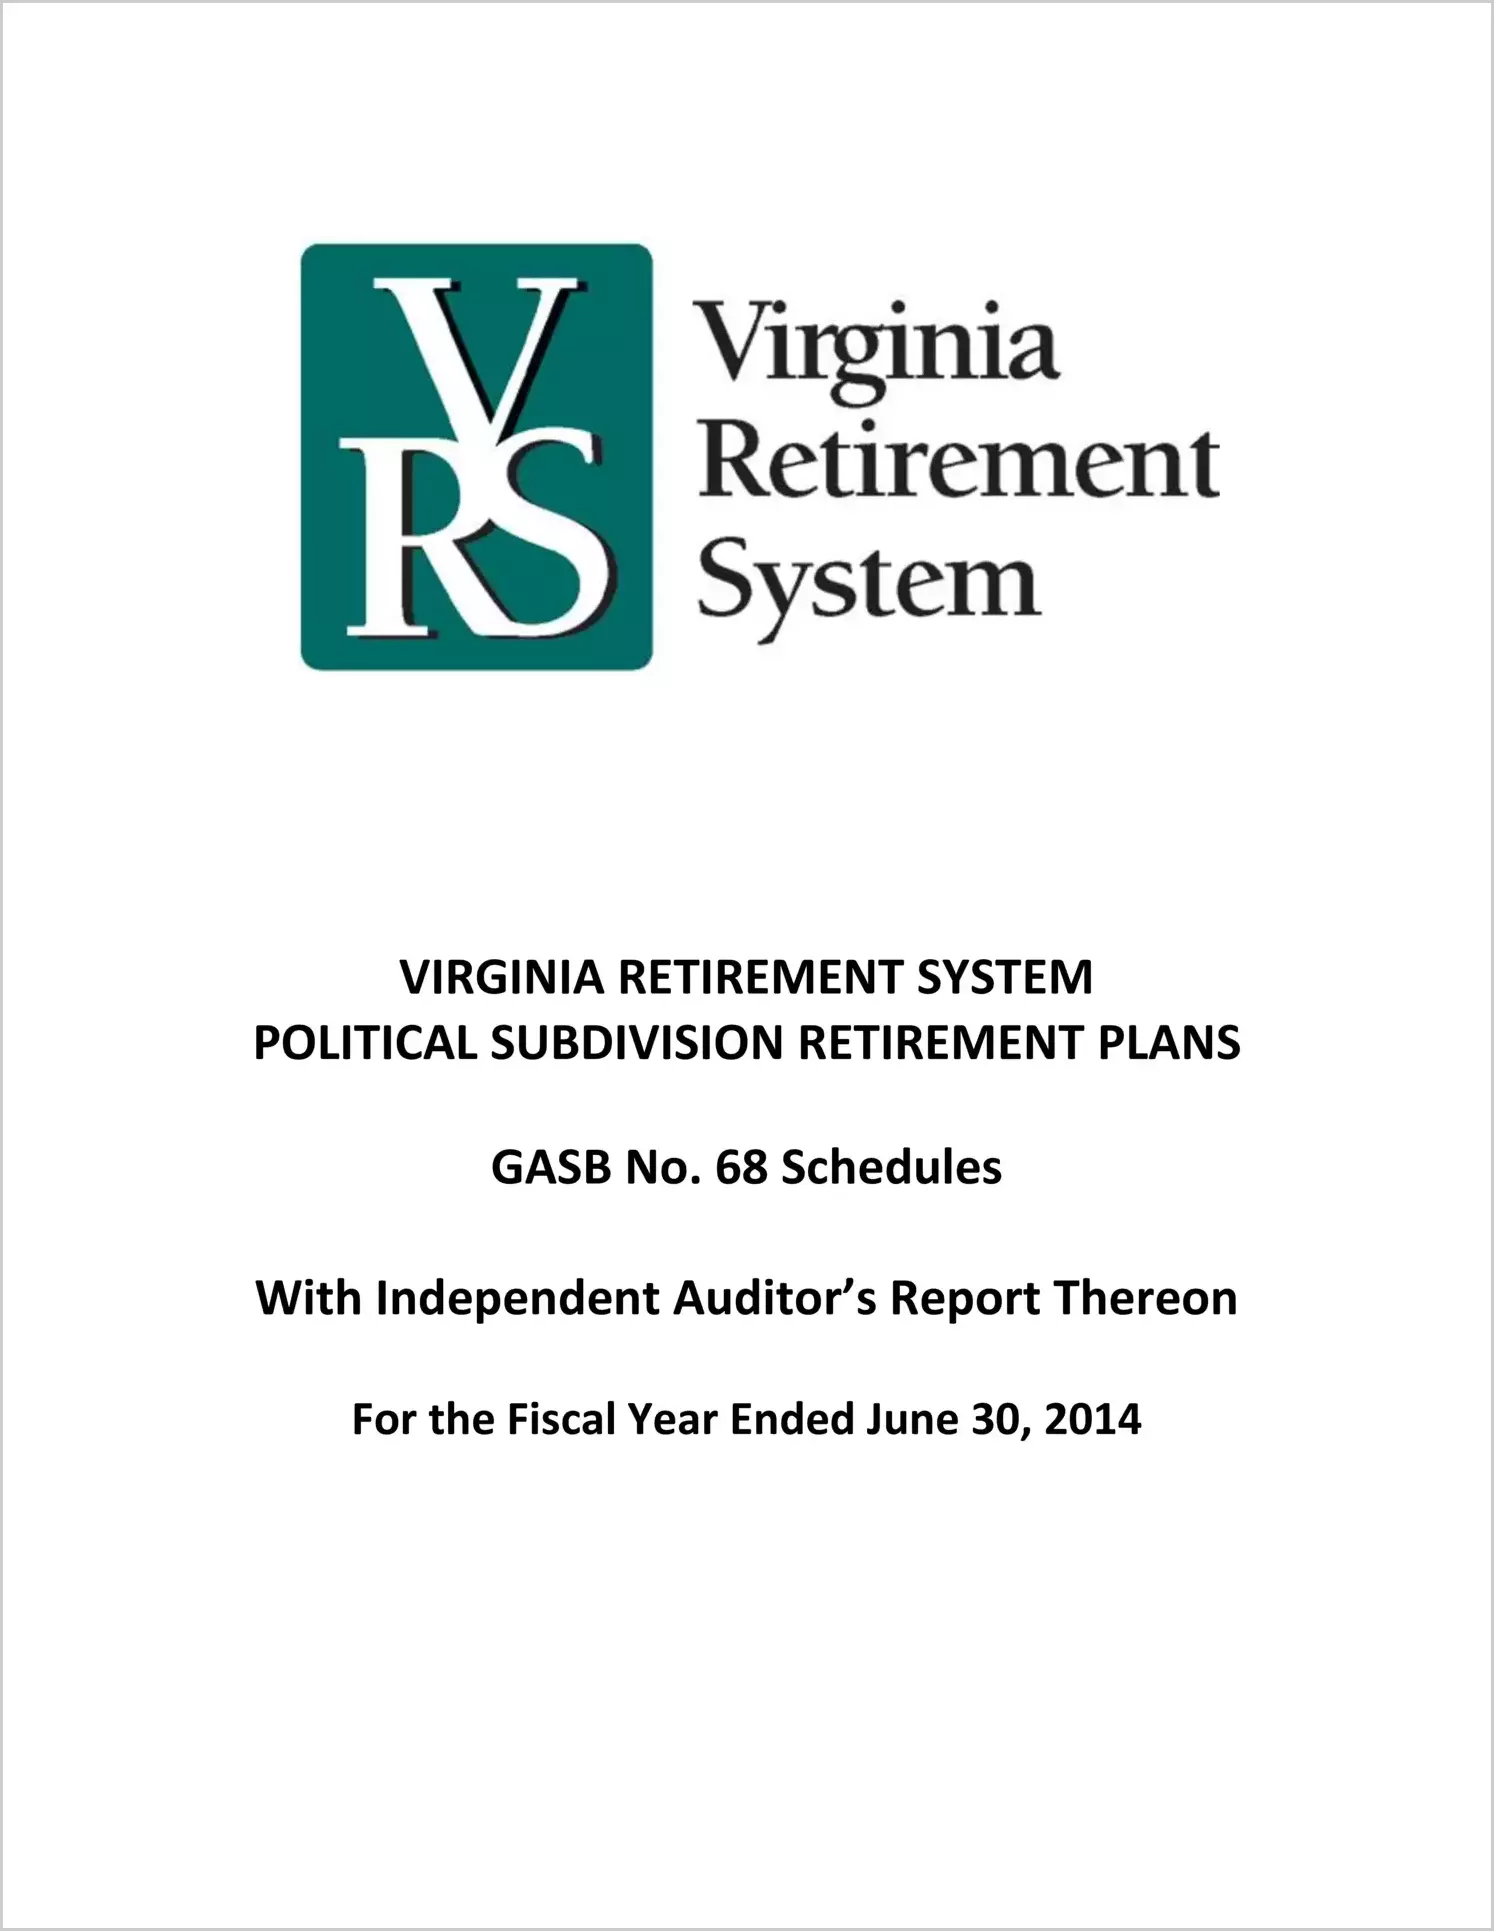 GASB 68 Schedule - Political Subdivision Retirement Plans for the fiscal year ended June 30, 2014